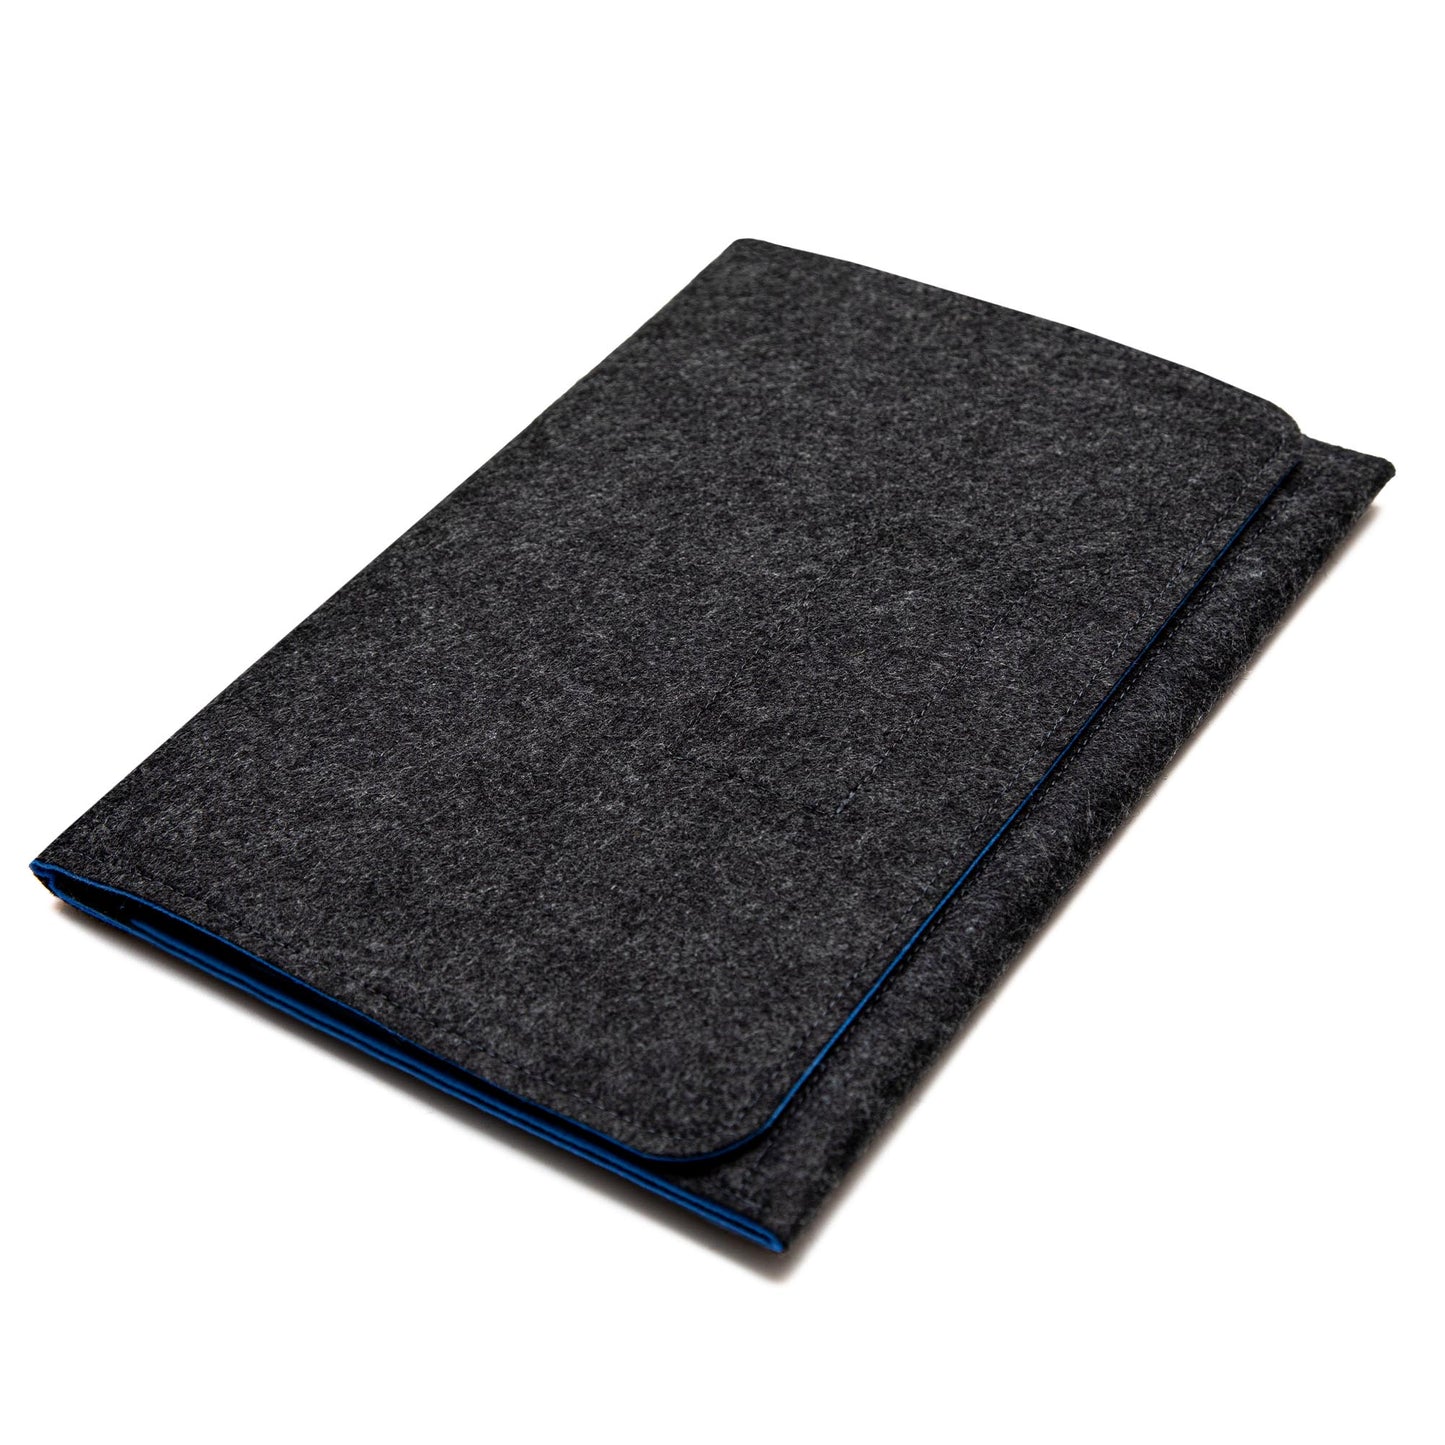 Premium Felt iPad Cover: Ultimate Protection with Accessories Pocket - Charcoal & Blue